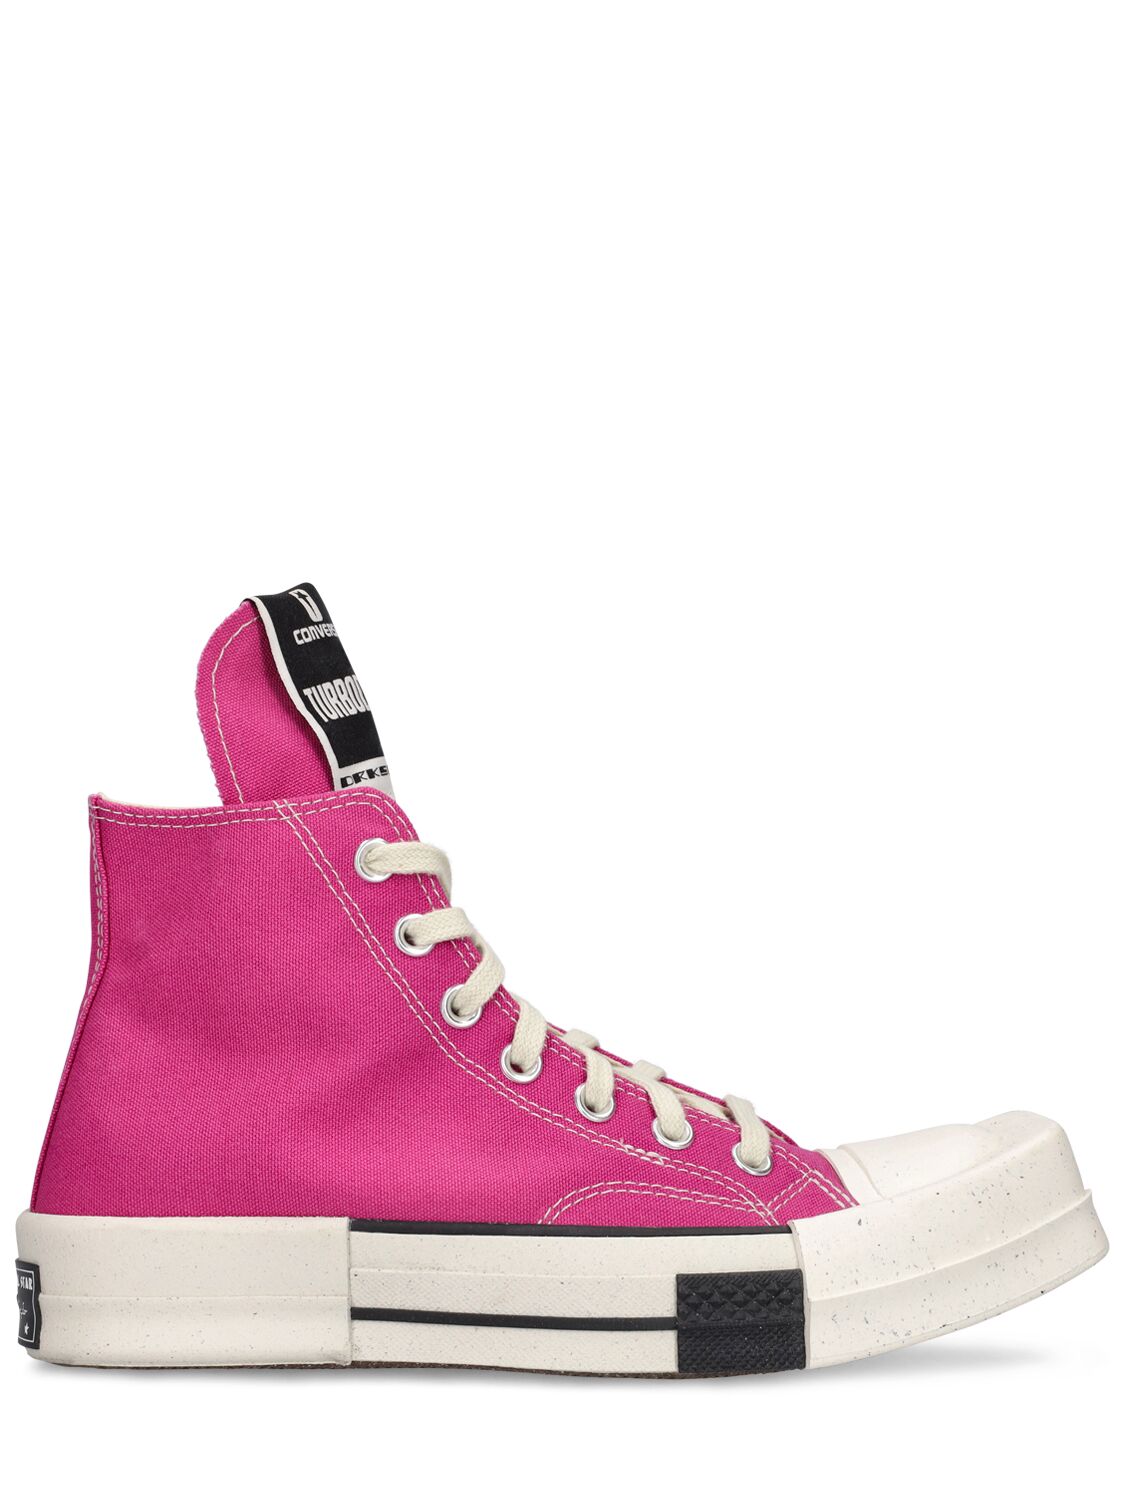 Drkshdw X Converse Turbodrk Laceless Trainers In Hot Pink